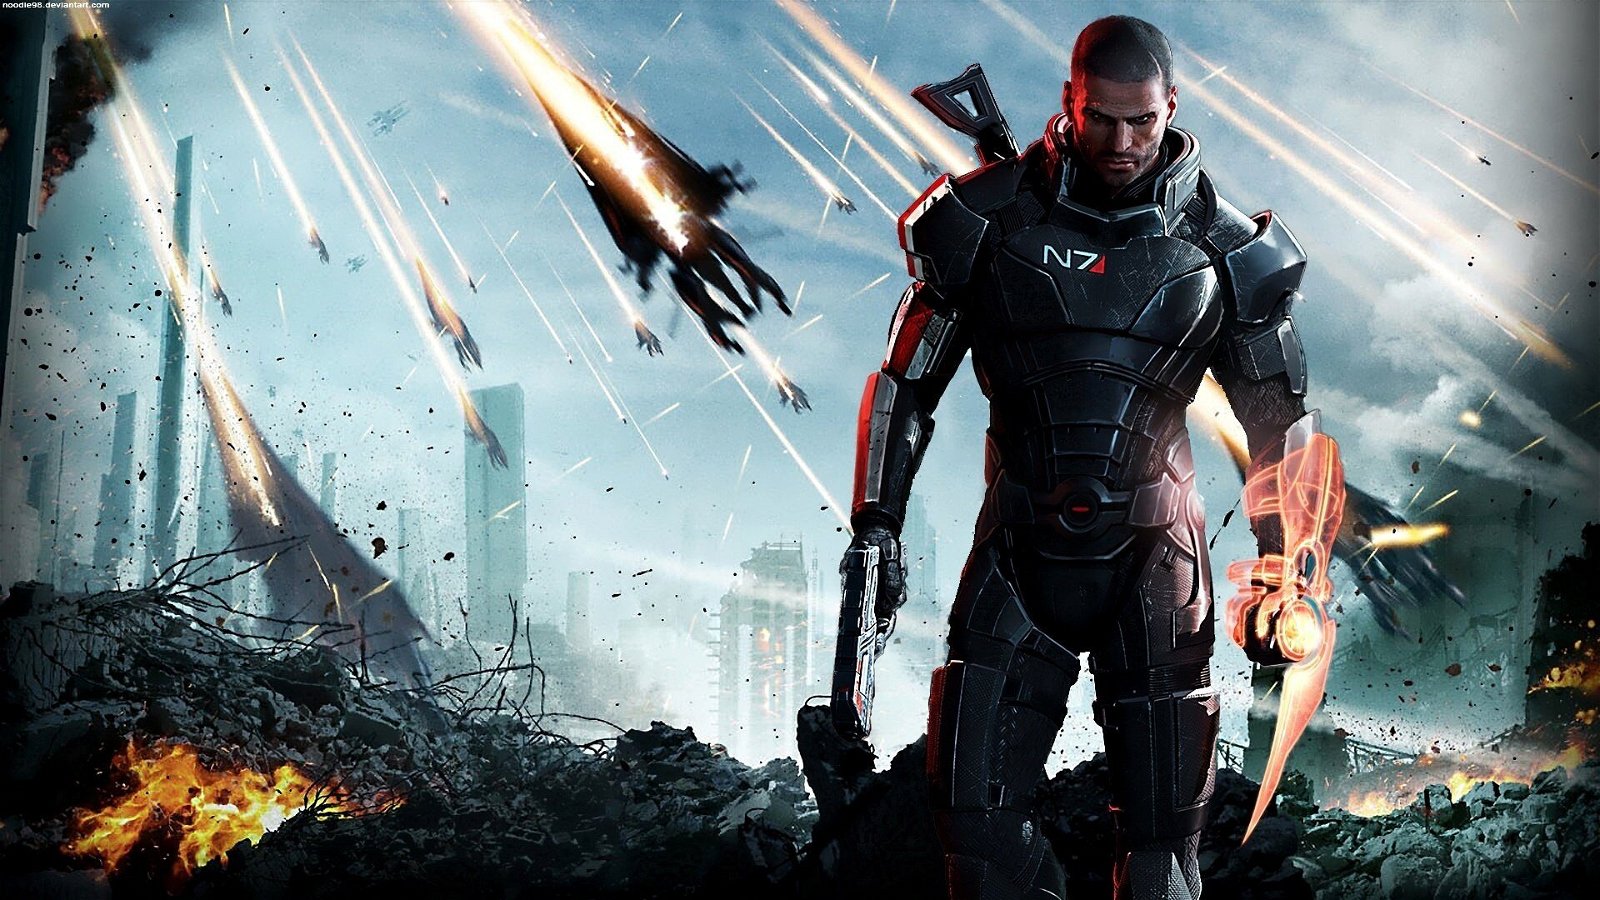 Bioware Mass Effect And Dragon Age 4 Developer Mac Walters Leaves After 19 Years 3